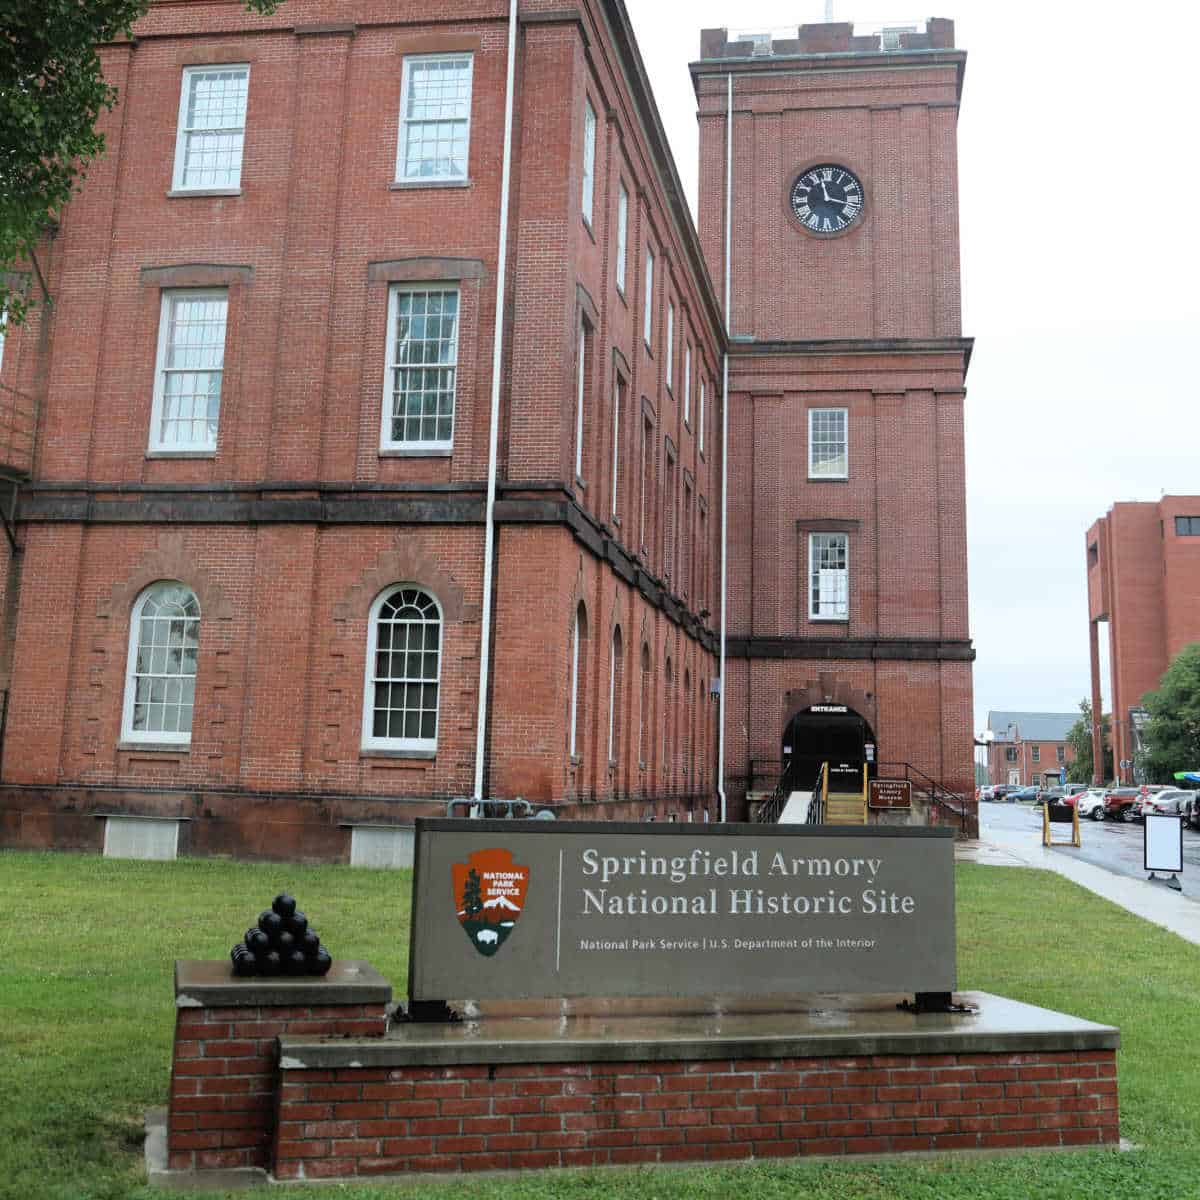 Springfield Armory National Historic Site in Massachusetts